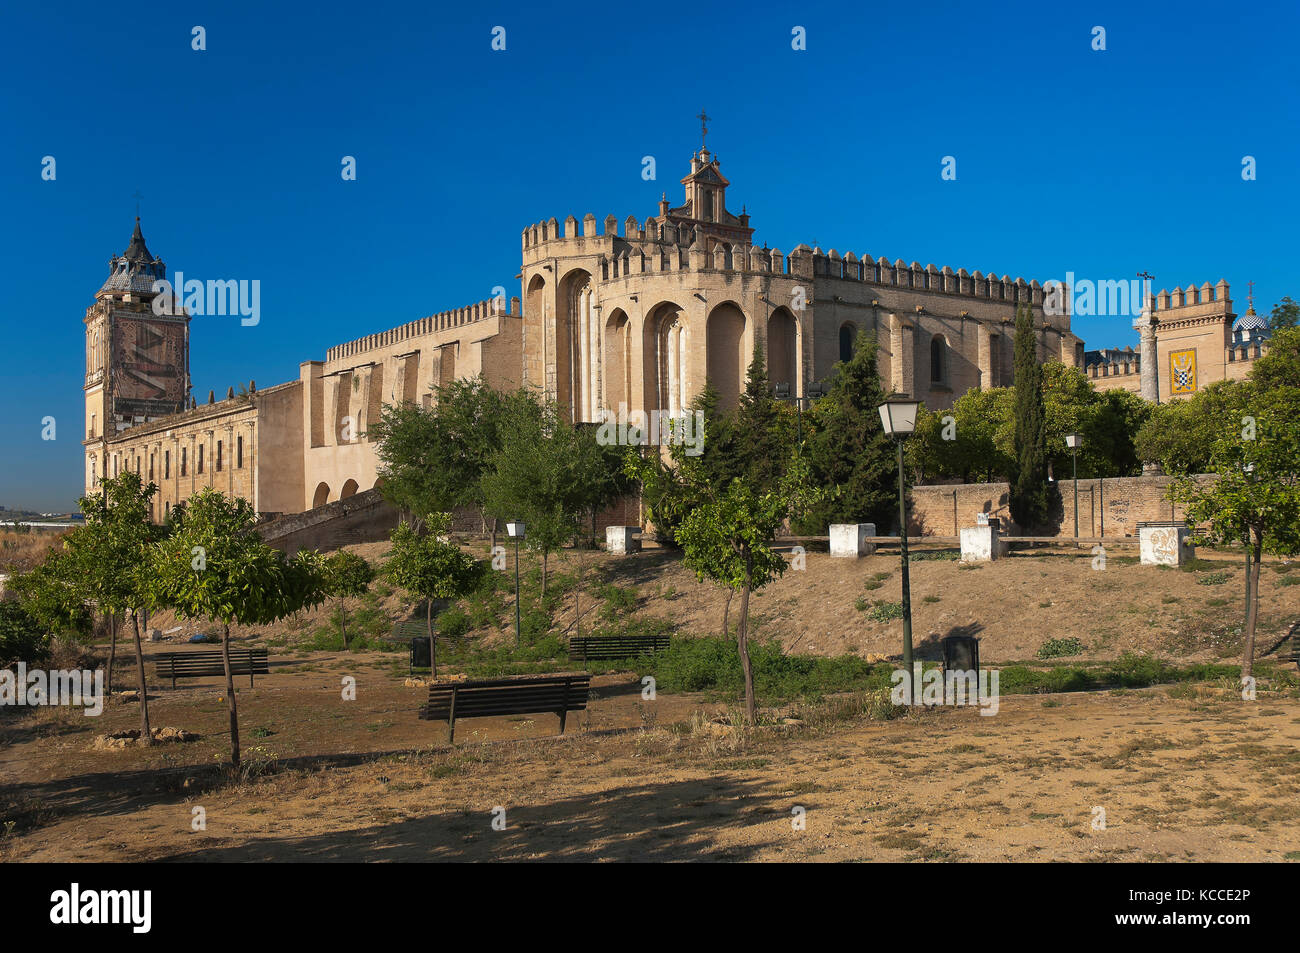 Monastery of San Isidoro del Campo - founded in 1301, Santiponce, Sevilla province, Region of Andalusia, Spain, Europe Stock Photo